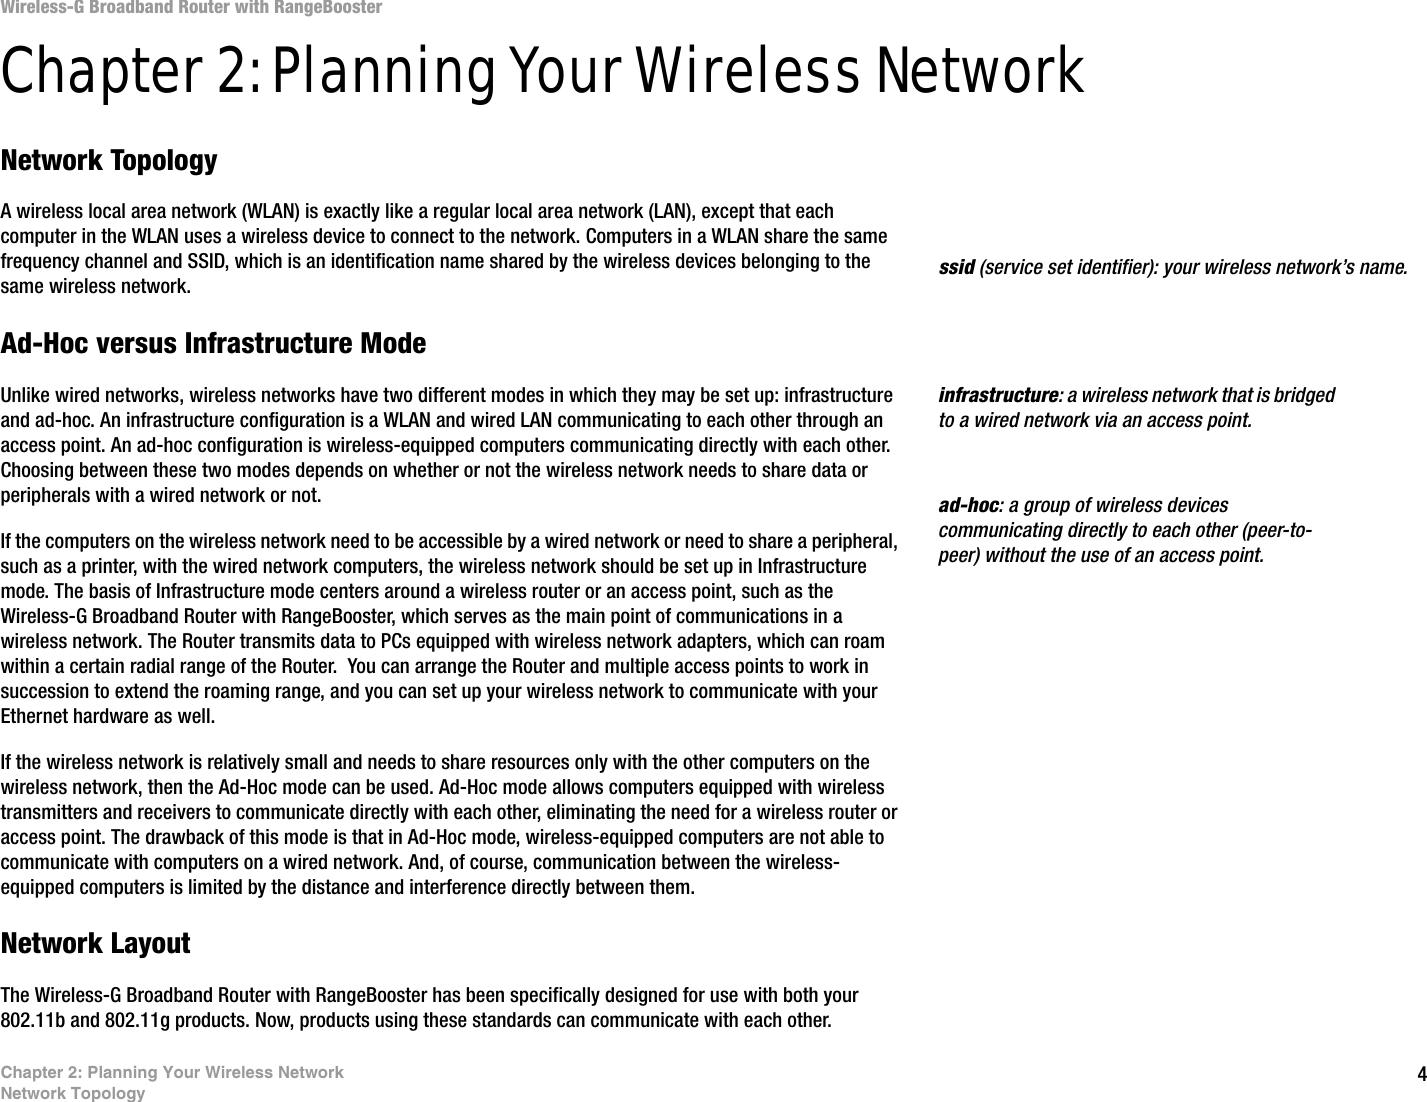 4Chapter 2: Planning Your Wireless NetworkNetwork TopologyWireless-G Broadband Router with RangeBoosterChapter 2: Planning Your Wireless NetworkNetwork TopologyA wireless local area network (WLAN) is exactly like a regular local area network (LAN), except that each computer in the WLAN uses a wireless device to connect to the network. Computers in a WLAN share the same frequency channel and SSID, which is an identification name shared by the wireless devices belonging to the same wireless network.Ad-Hoc versus Infrastructure ModeUnlike wired networks, wireless networks have two different modes in which they may be set up: infrastructure and ad-hoc. An infrastructure configuration is a WLAN and wired LAN communicating to each other through an access point. An ad-hoc configuration is wireless-equipped computers communicating directly with each other. Choosing between these two modes depends on whether or not the wireless network needs to share data or peripherals with a wired network or not. If the computers on the wireless network need to be accessible by a wired network or need to share a peripheral, such as a printer, with the wired network computers, the wireless network should be set up in Infrastructure mode. The basis of Infrastructure mode centers around a wireless router or an access point, such as the Wireless-G Broadband Router with RangeBooster, which serves as the main point of communications in a wireless network. The Router transmits data to PCs equipped with wireless network adapters, which can roam within a certain radial range of the Router.  You can arrange the Router and multiple access points to work in succession to extend the roaming range, and you can set up your wireless network to communicate with your Ethernet hardware as well. If the wireless network is relatively small and needs to share resources only with the other computers on the wireless network, then the Ad-Hoc mode can be used. Ad-Hoc mode allows computers equipped with wireless transmitters and receivers to communicate directly with each other, eliminating the need for a wireless router or access point. The drawback of this mode is that in Ad-Hoc mode, wireless-equipped computers are not able to communicate with computers on a wired network. And, of course, communication between the wireless-equipped computers is limited by the distance and interference directly between them. Network LayoutThe Wireless-G Broadband Router with RangeBooster has been specifically designed for use with both your 802.11b and 802.11g products. Now, products using these standards can communicate with each other.infrastructure: a wireless network that is bridged to a wired network via an access point.ssid (service set identifier): your wireless network’s name.ad-hoc: a group of wireless devices communicating directly to each other (peer-to-peer) without the use of an access point.